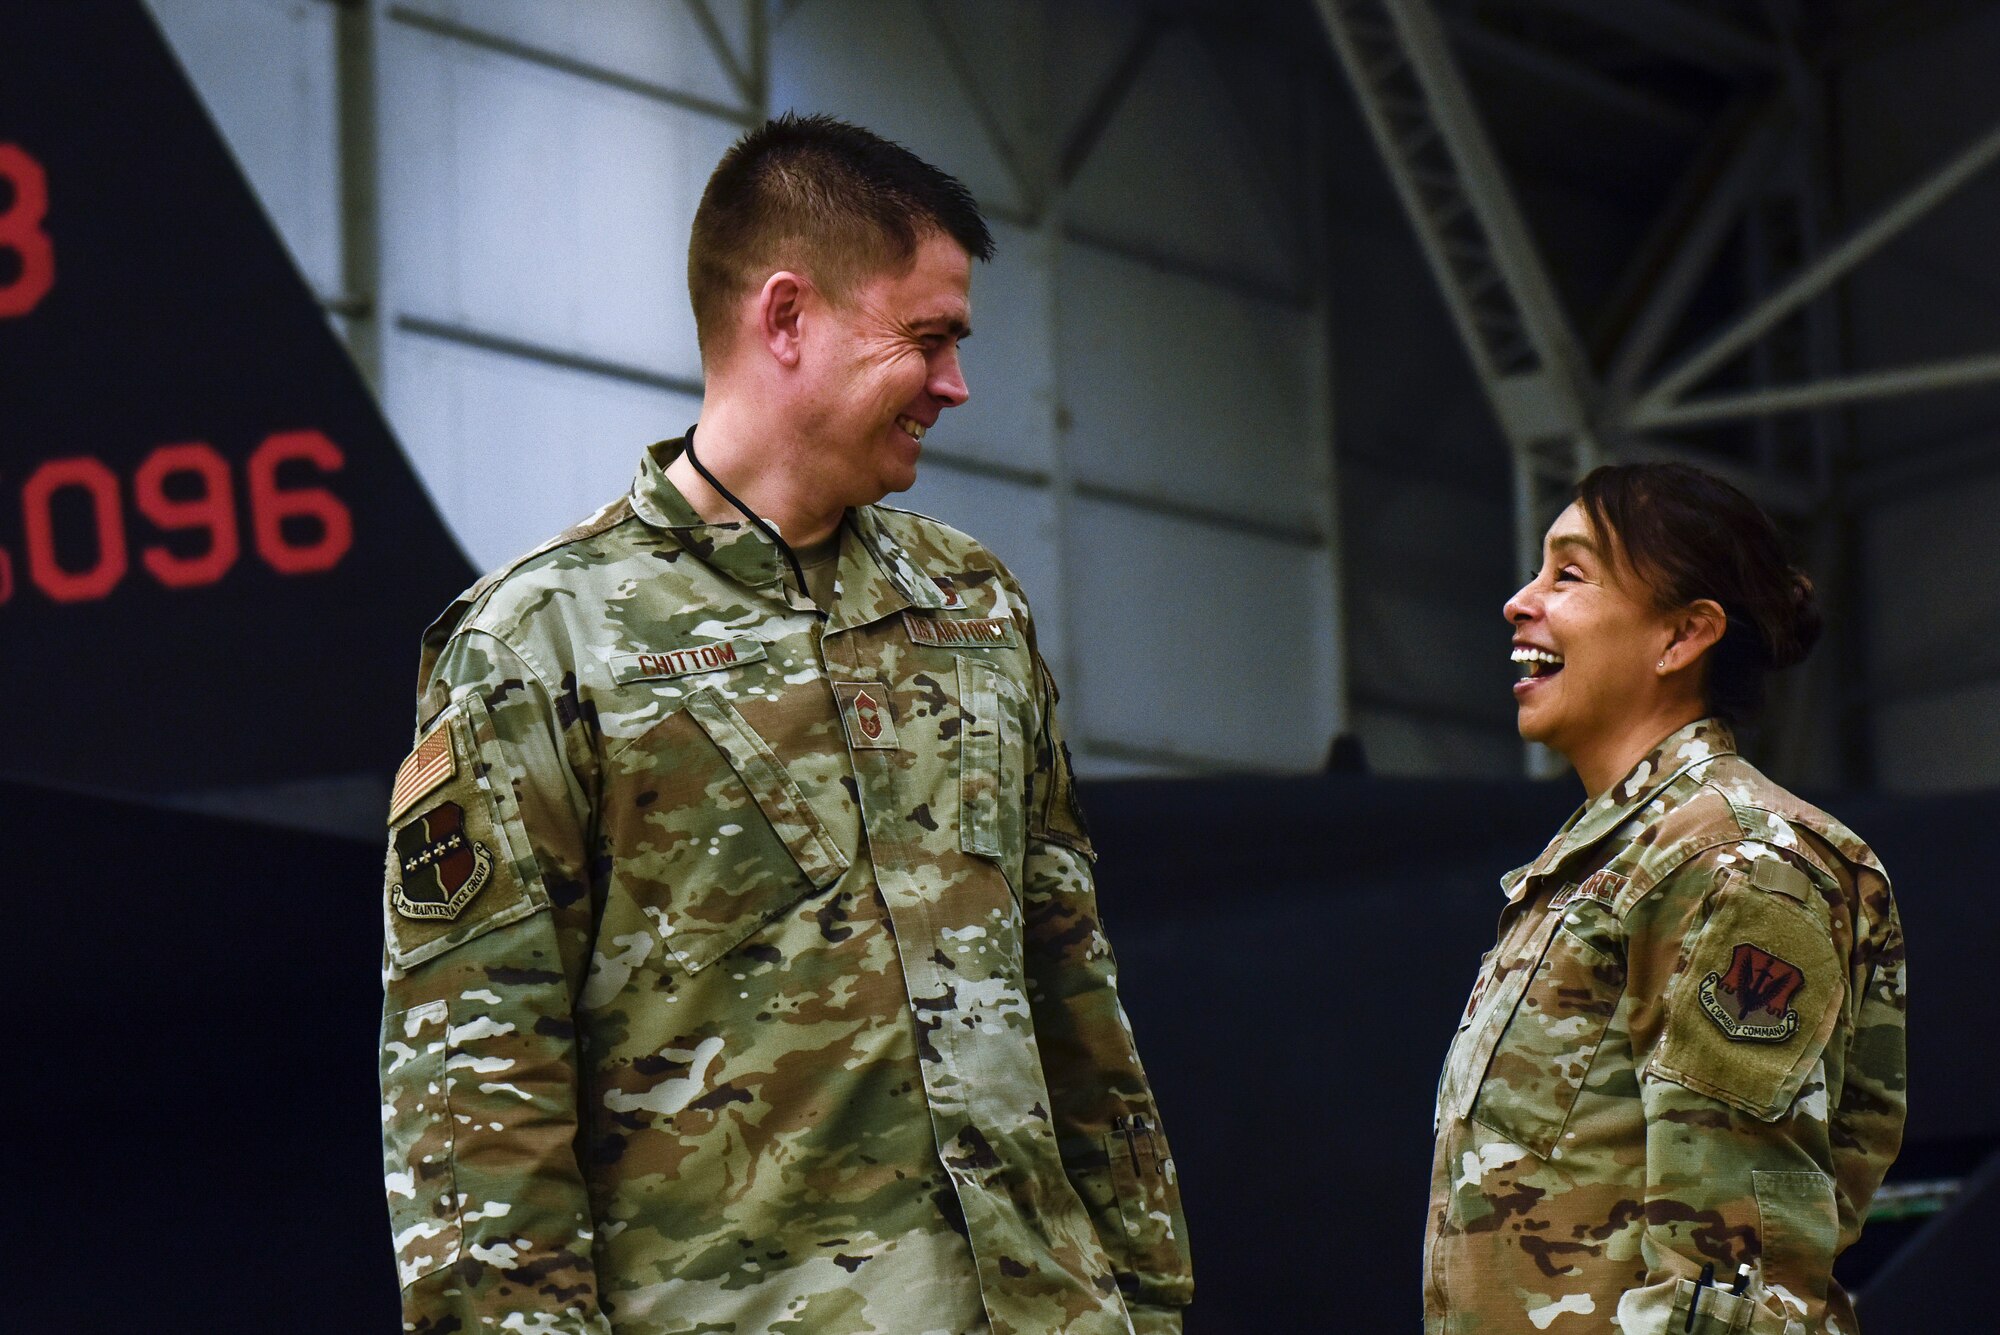 U.S. Air Force Chief Master Sgt. Esmeralda Chittom, 9th Operations Group senior enlisted leader, and U.S. Air Chief Master Sgt. Bobby Chittom, 9th Maintenance Group senior enlisted leader pose inside a hanger Feb. 14, 2023, at Beale Air Force Base, Calif.